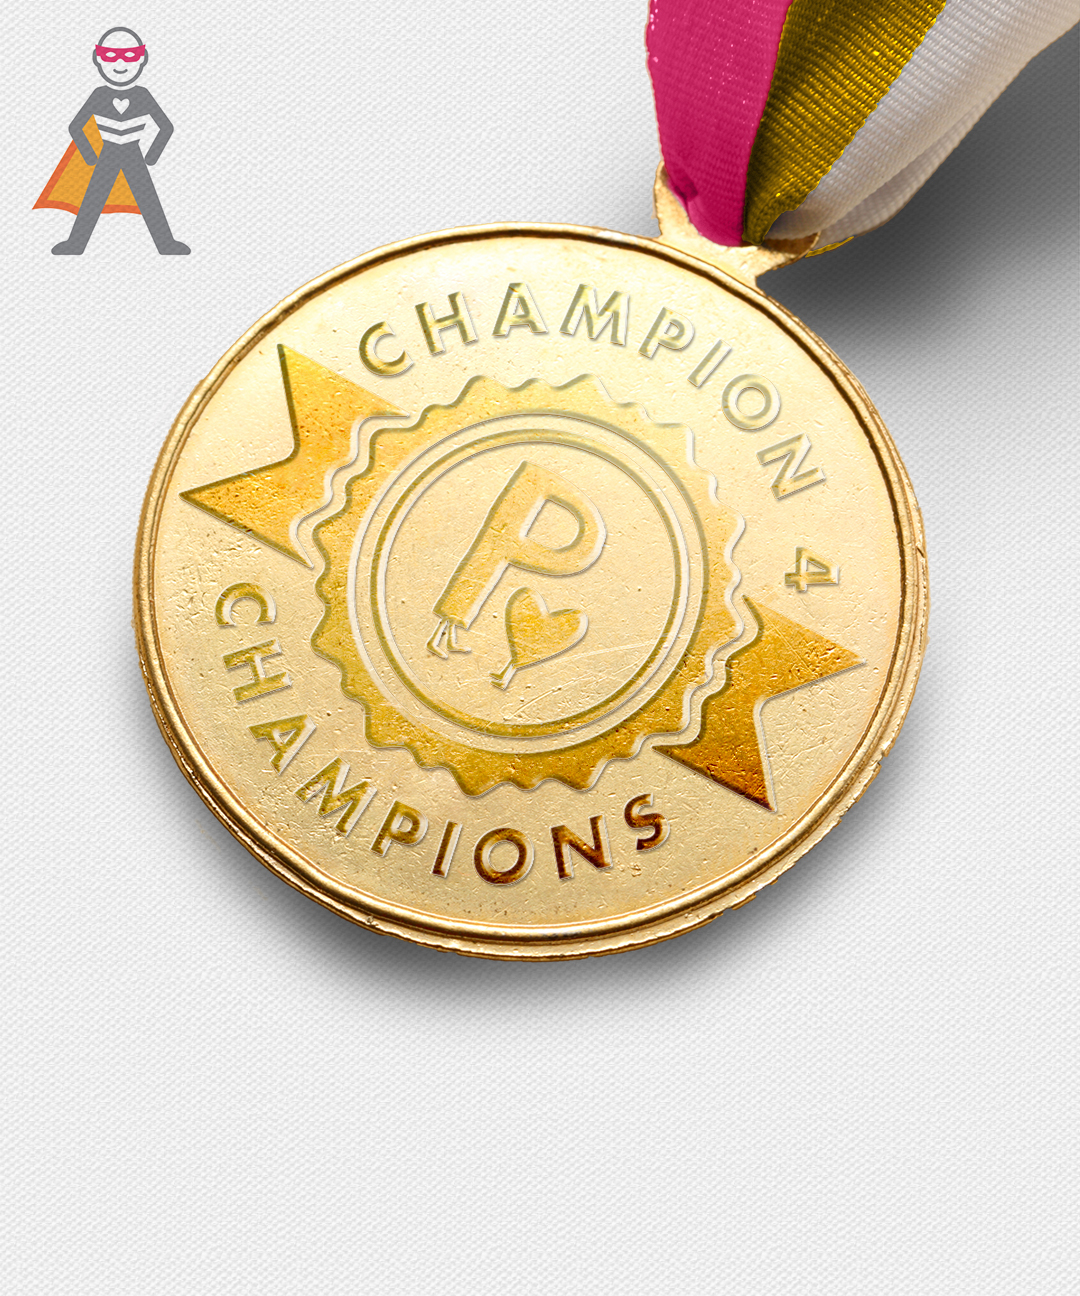 Champions for Champions Gold Medal